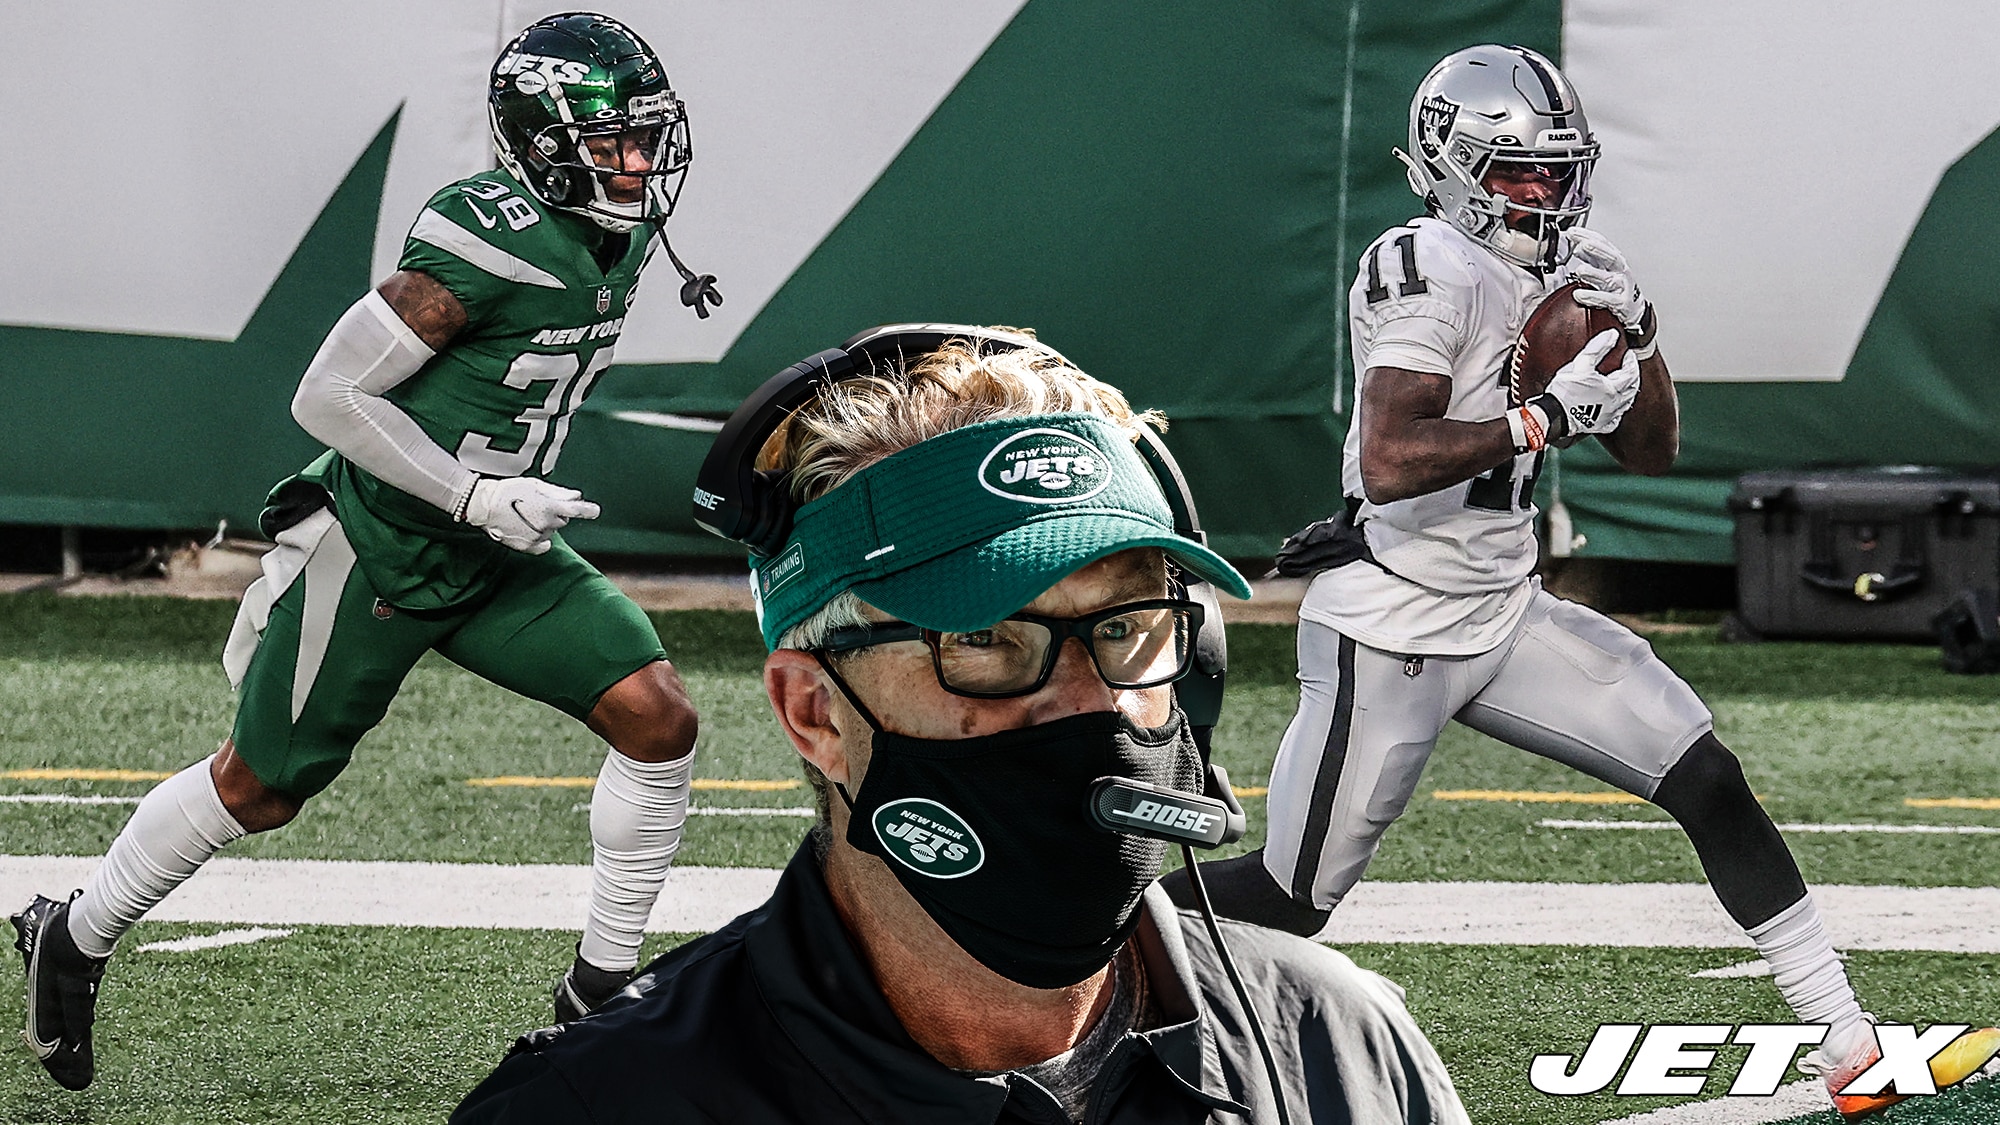 Suggesting Gregg Williams Tanked The Jets Is Par For The Course Idiocy